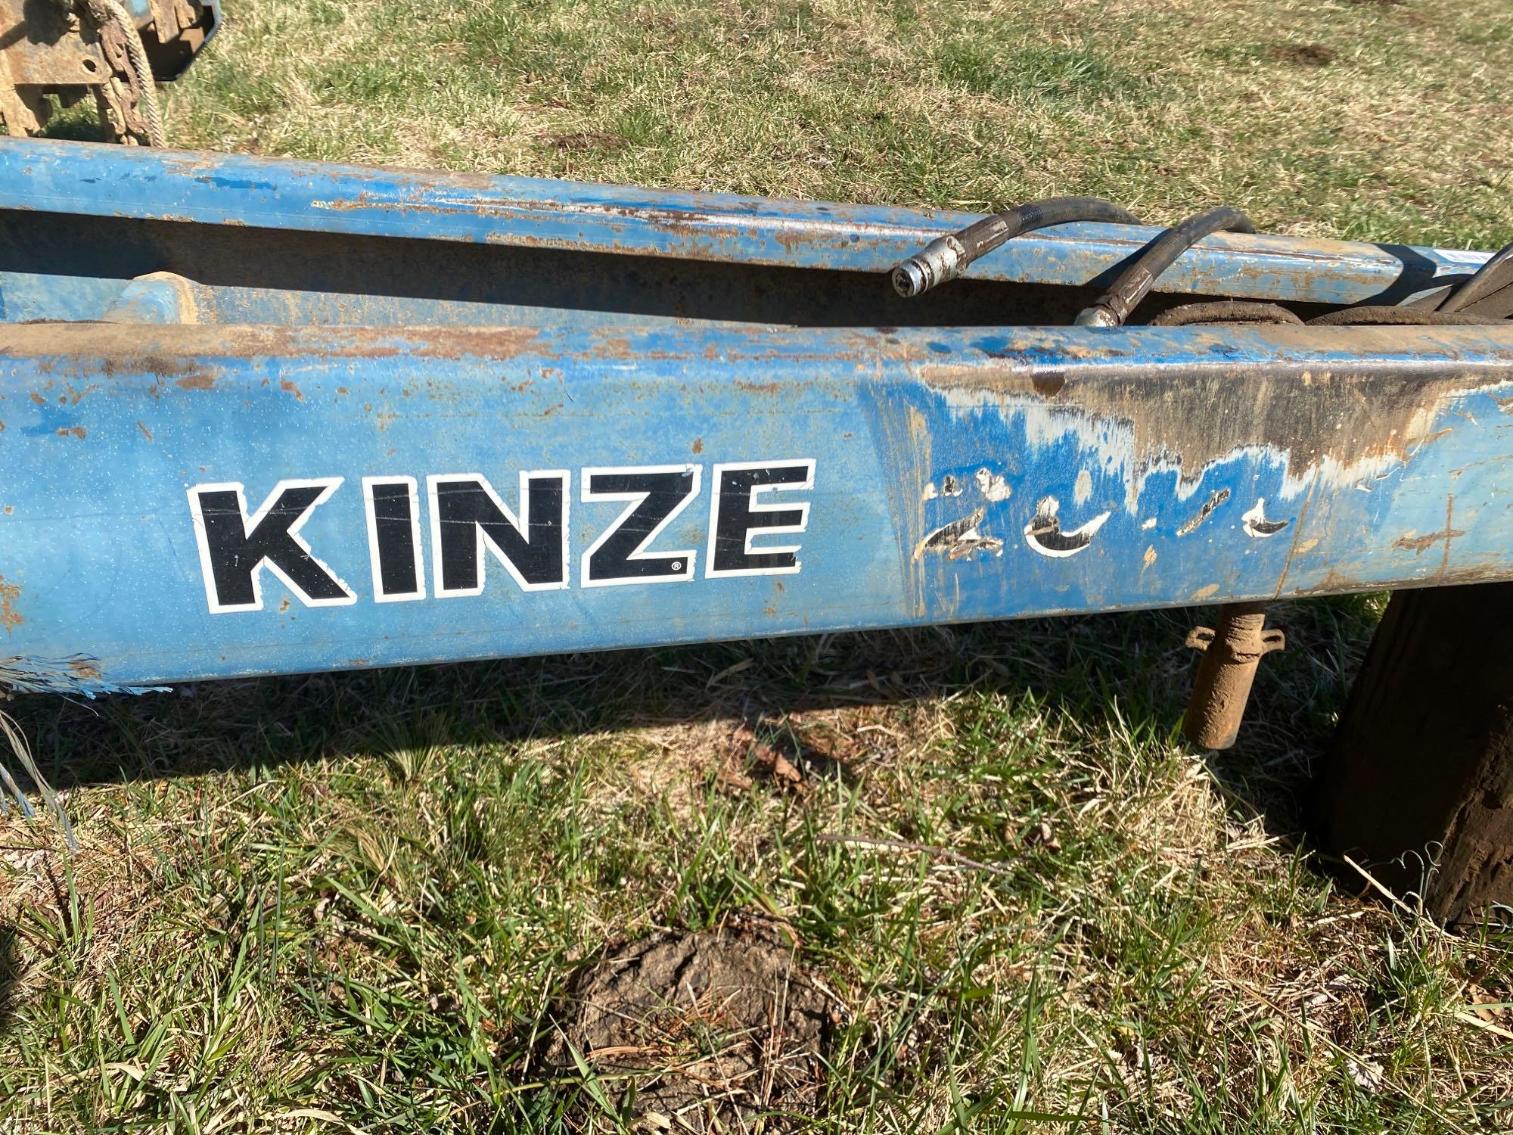 Image for KINZE 2000 Double Frame Planter w/ monitor, some spare parts. Per seller: Needs some TLC but usable